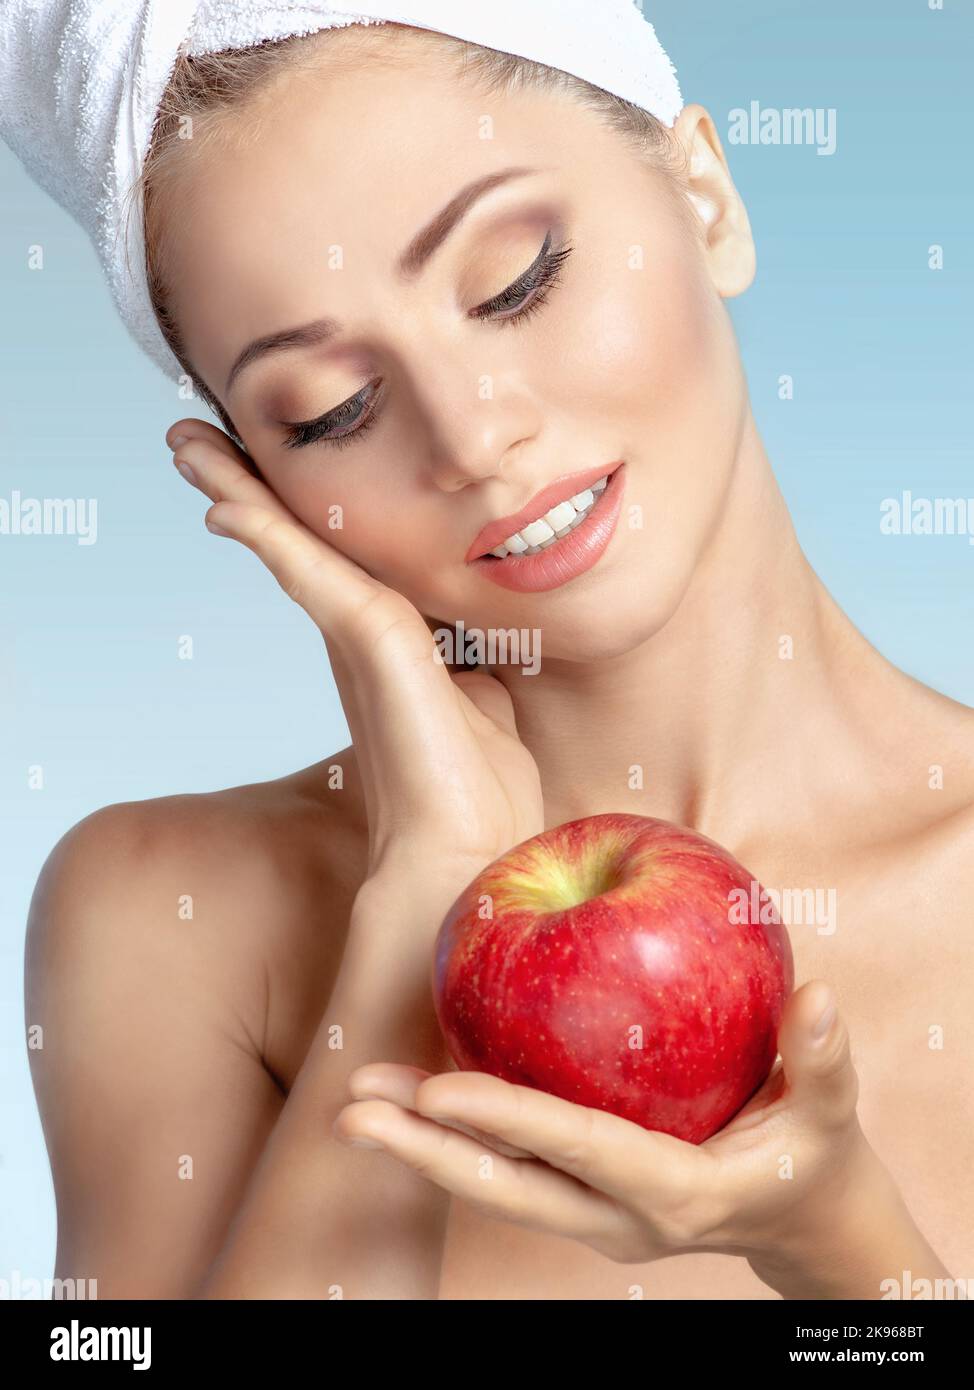 Close-up face of young beautiful smiling woman in towel on head holding red apple. Natural beauty, spa, skin care, cosmetics concept Stock Photo